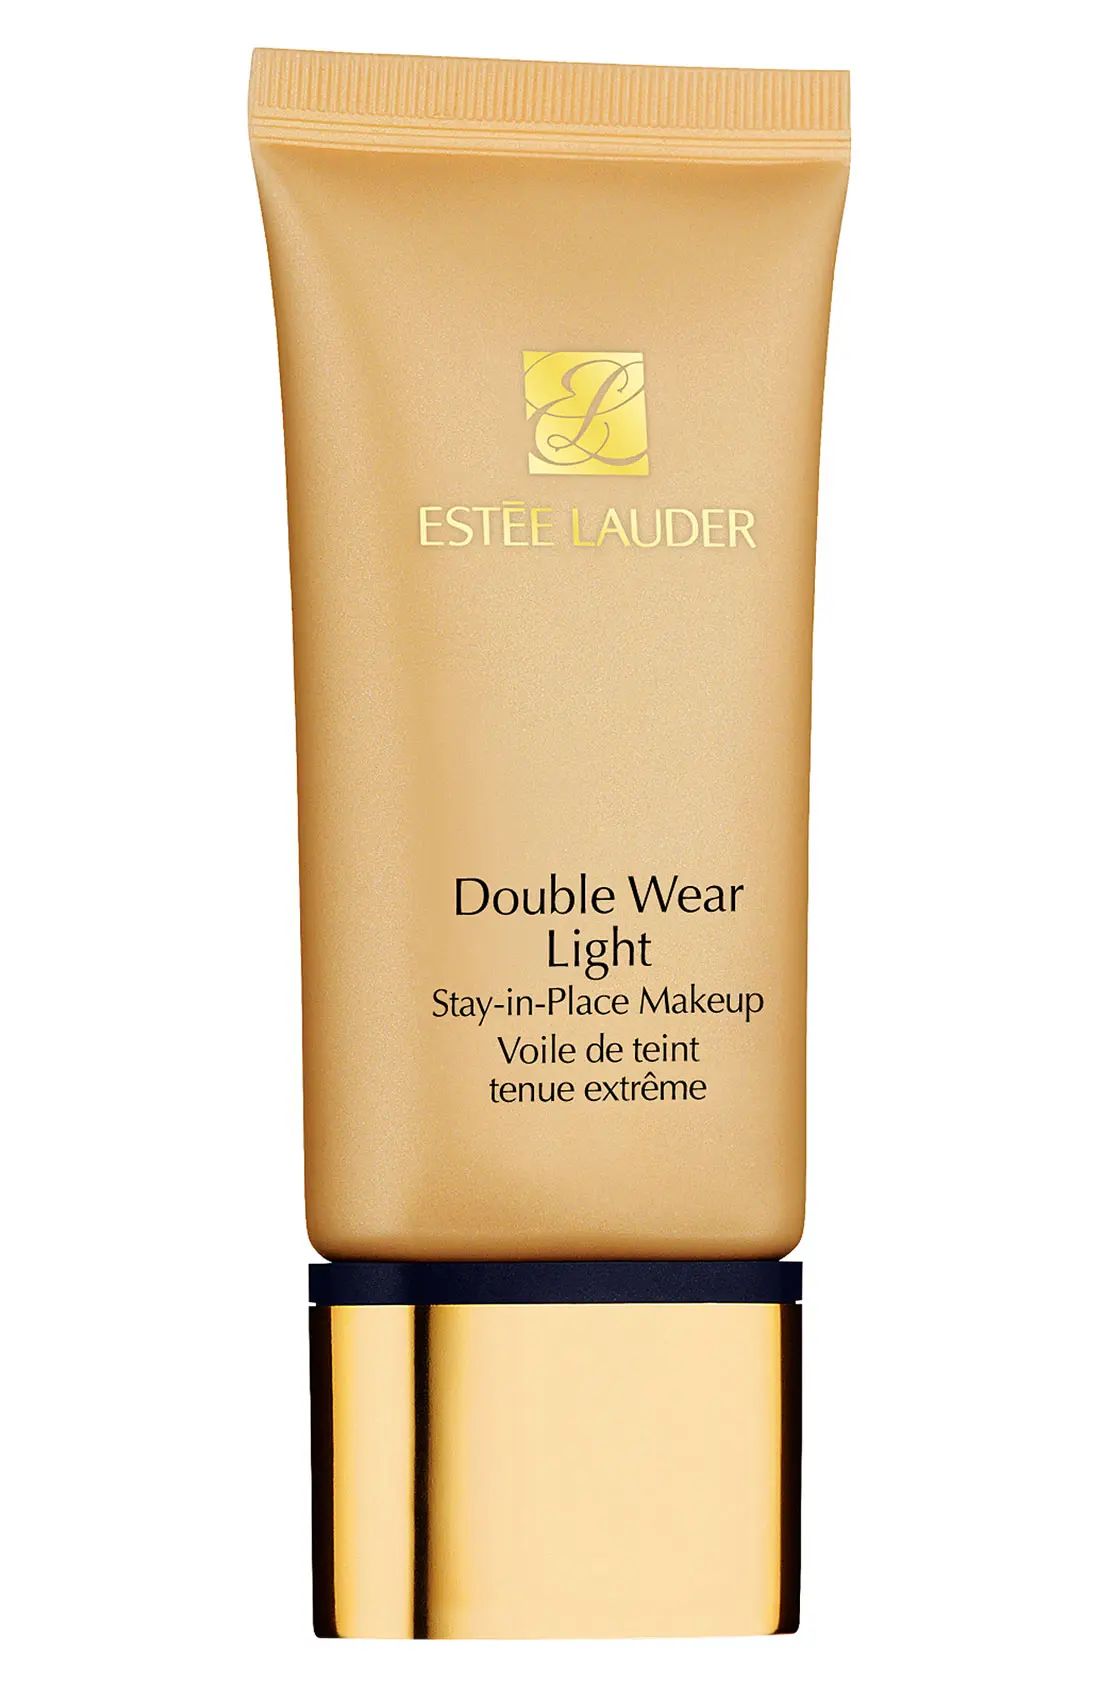 Estee Lauder Double Wear Light Stay-In-Place Makeup Foundation - 6.5 Intensity | Nordstrom